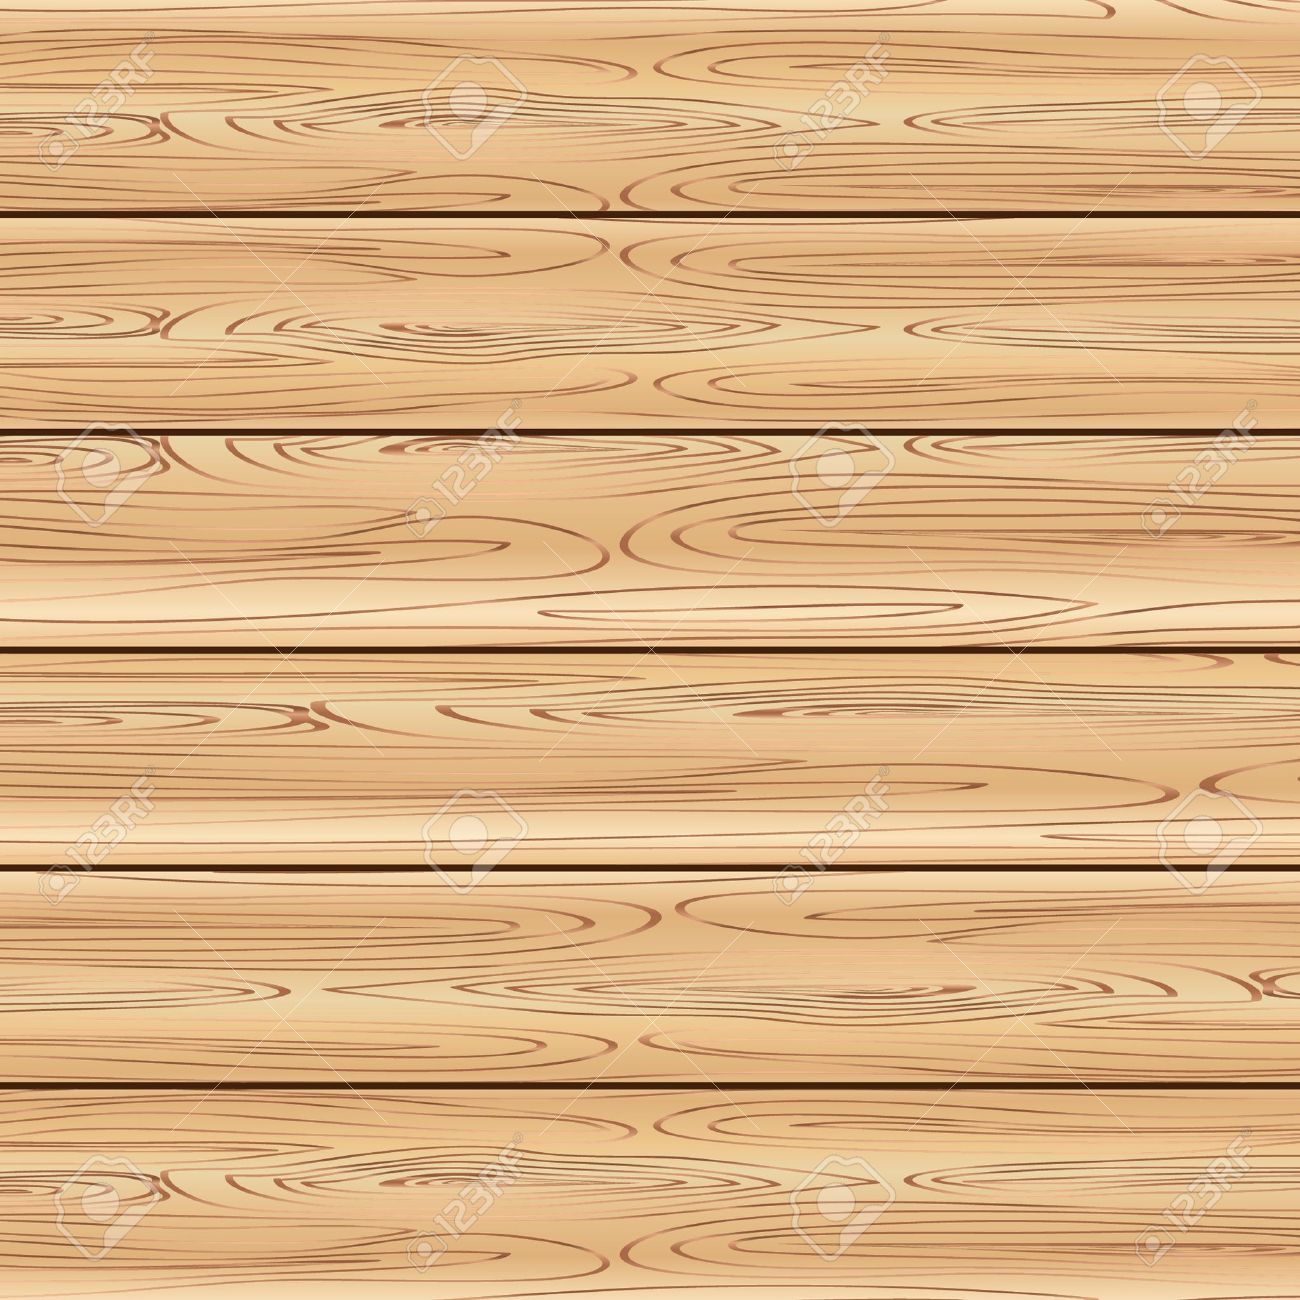 wood clipart background - photo #10